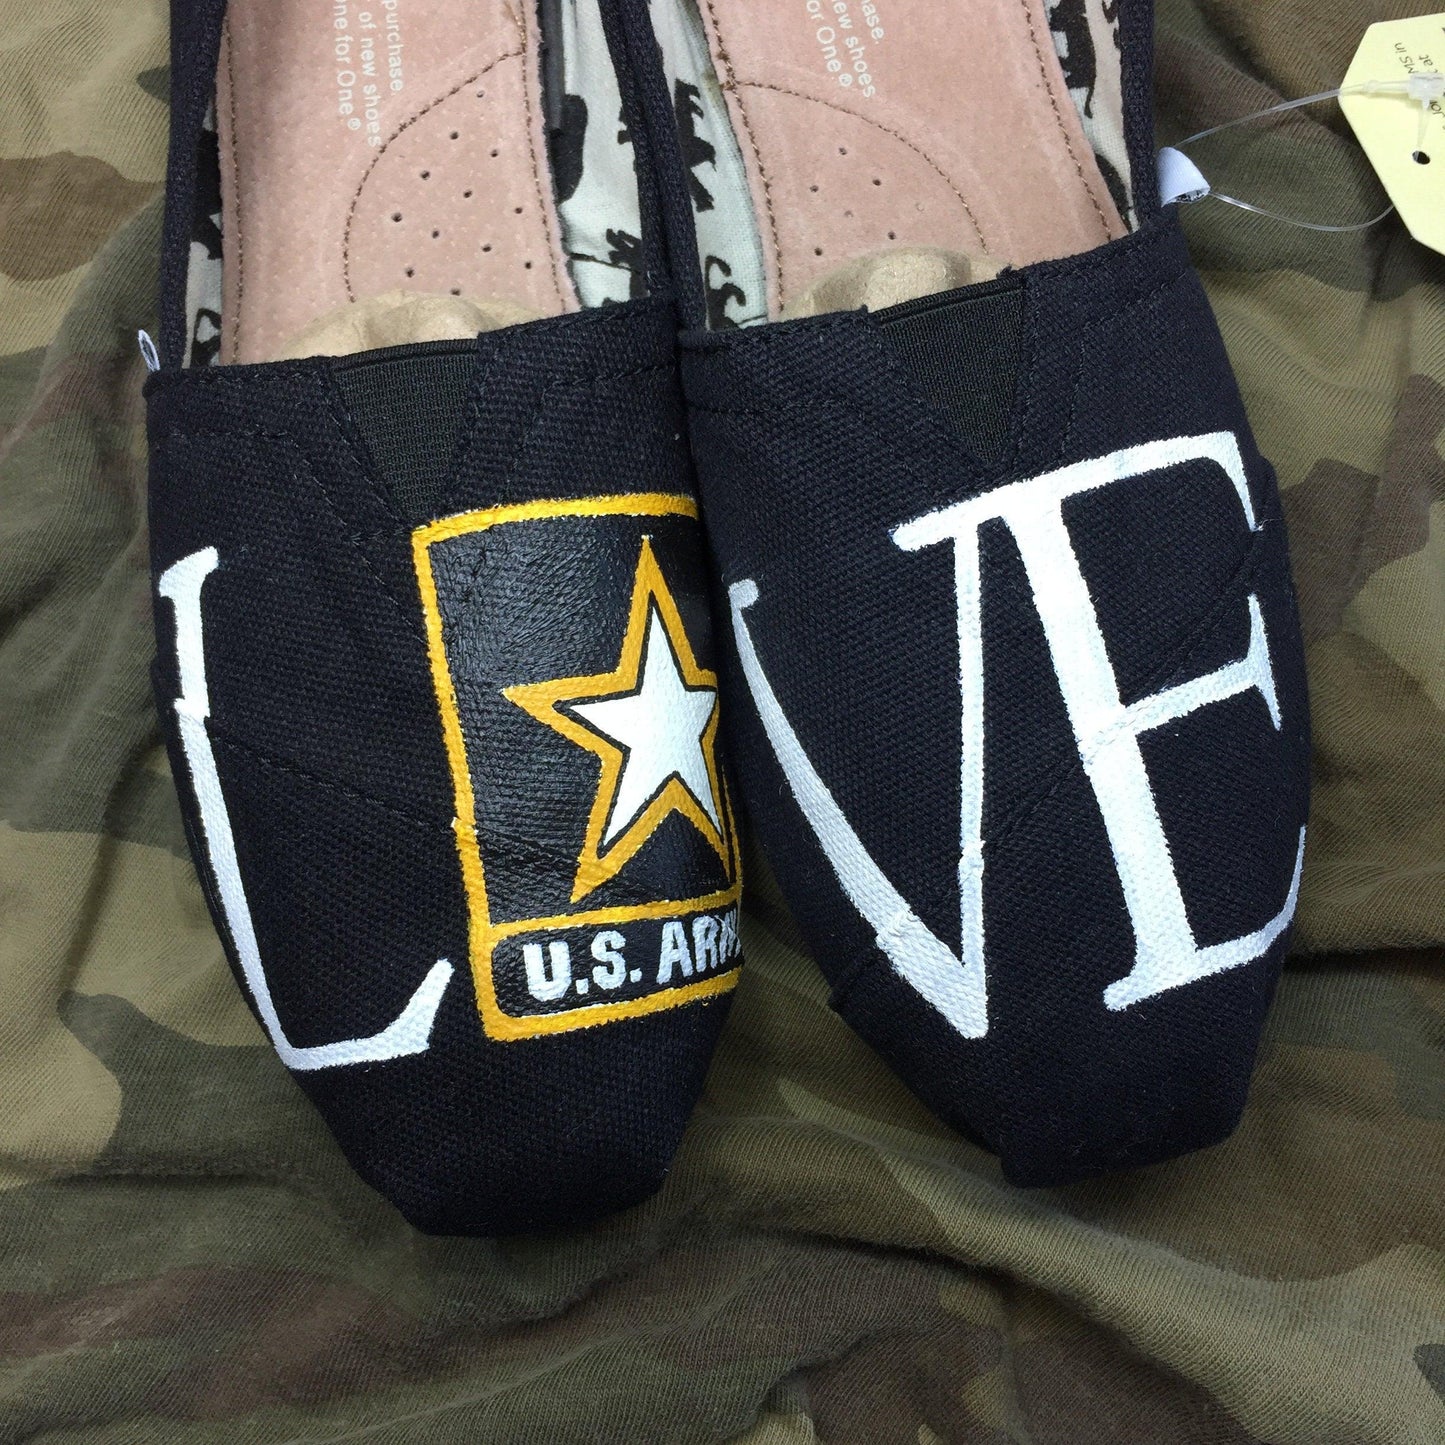 Army Love Shoes-Shoes-ButterMakesMeHappy